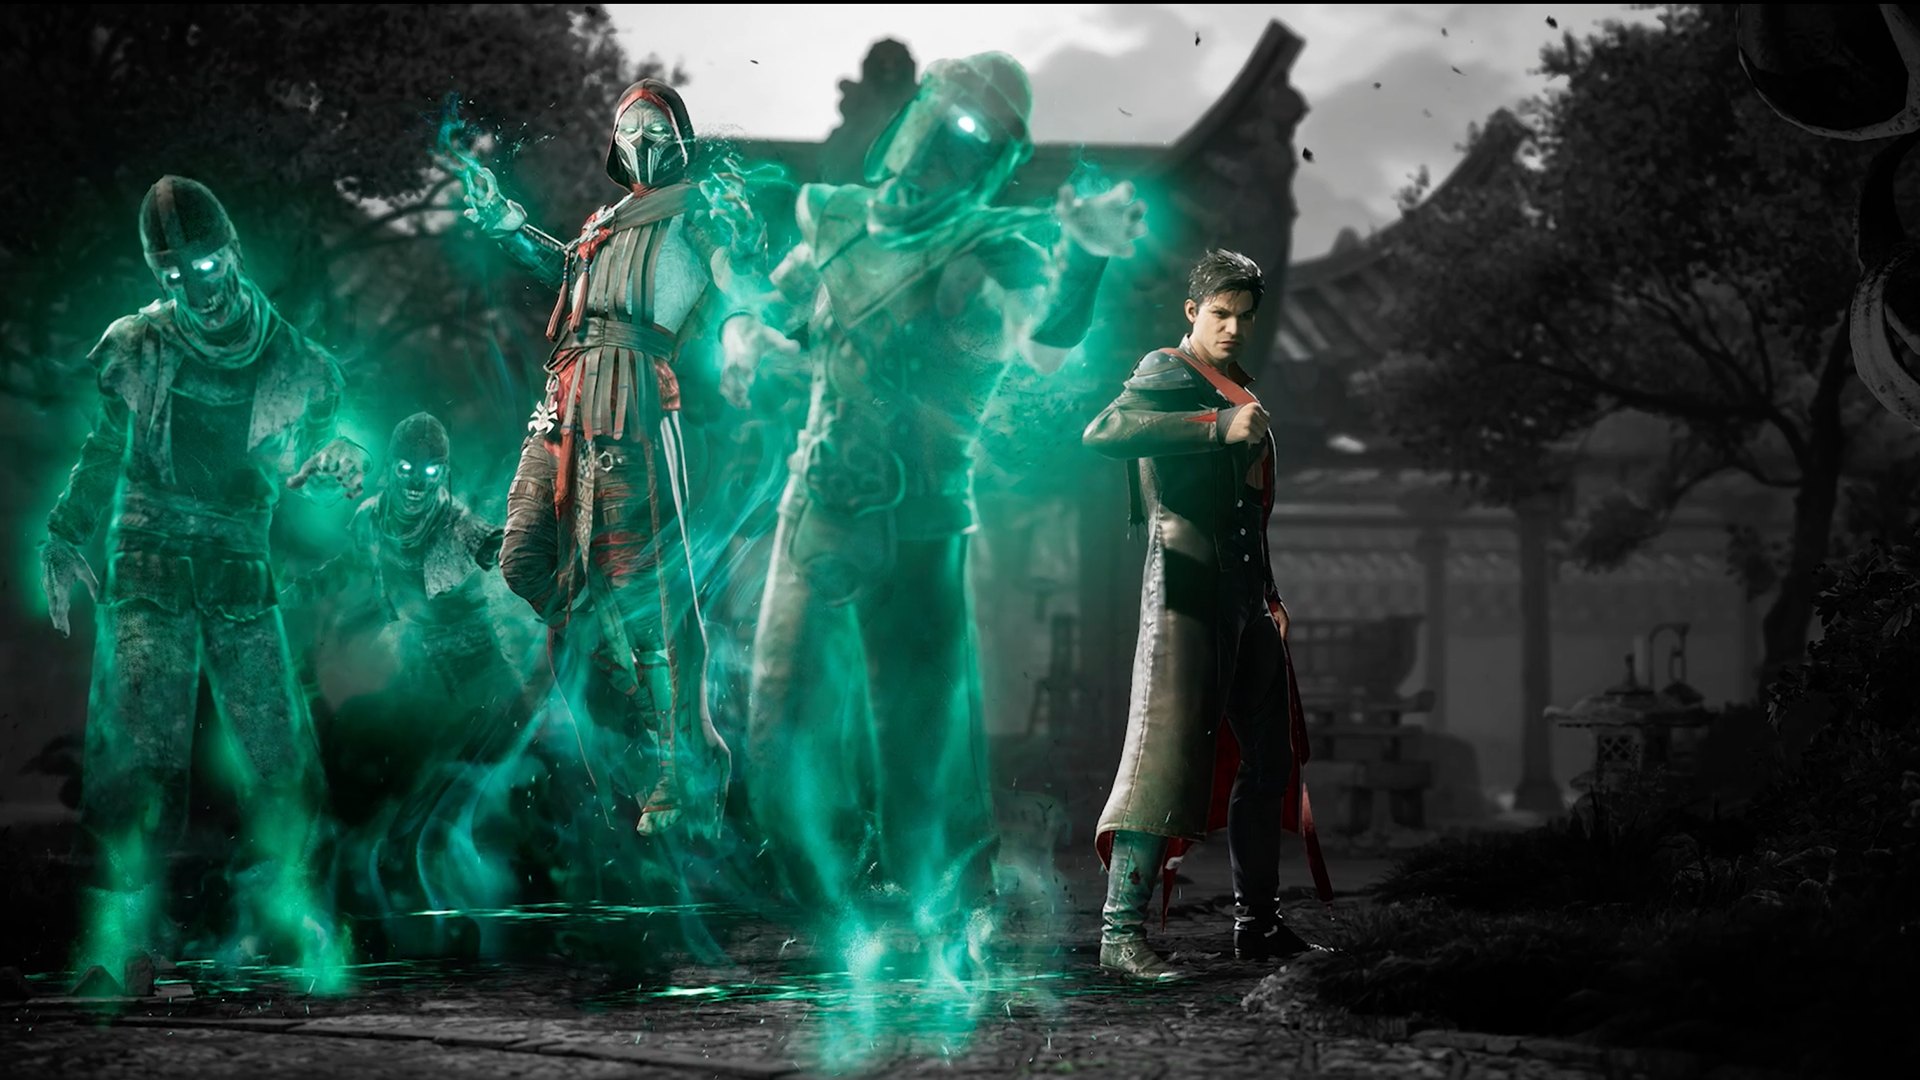 New Mortal Kombat 1 Trailer Unveils First Look At Gameplay For Upcoming DLC Fighter Ermac – Available April 16 As Part Of The Kombat Pack